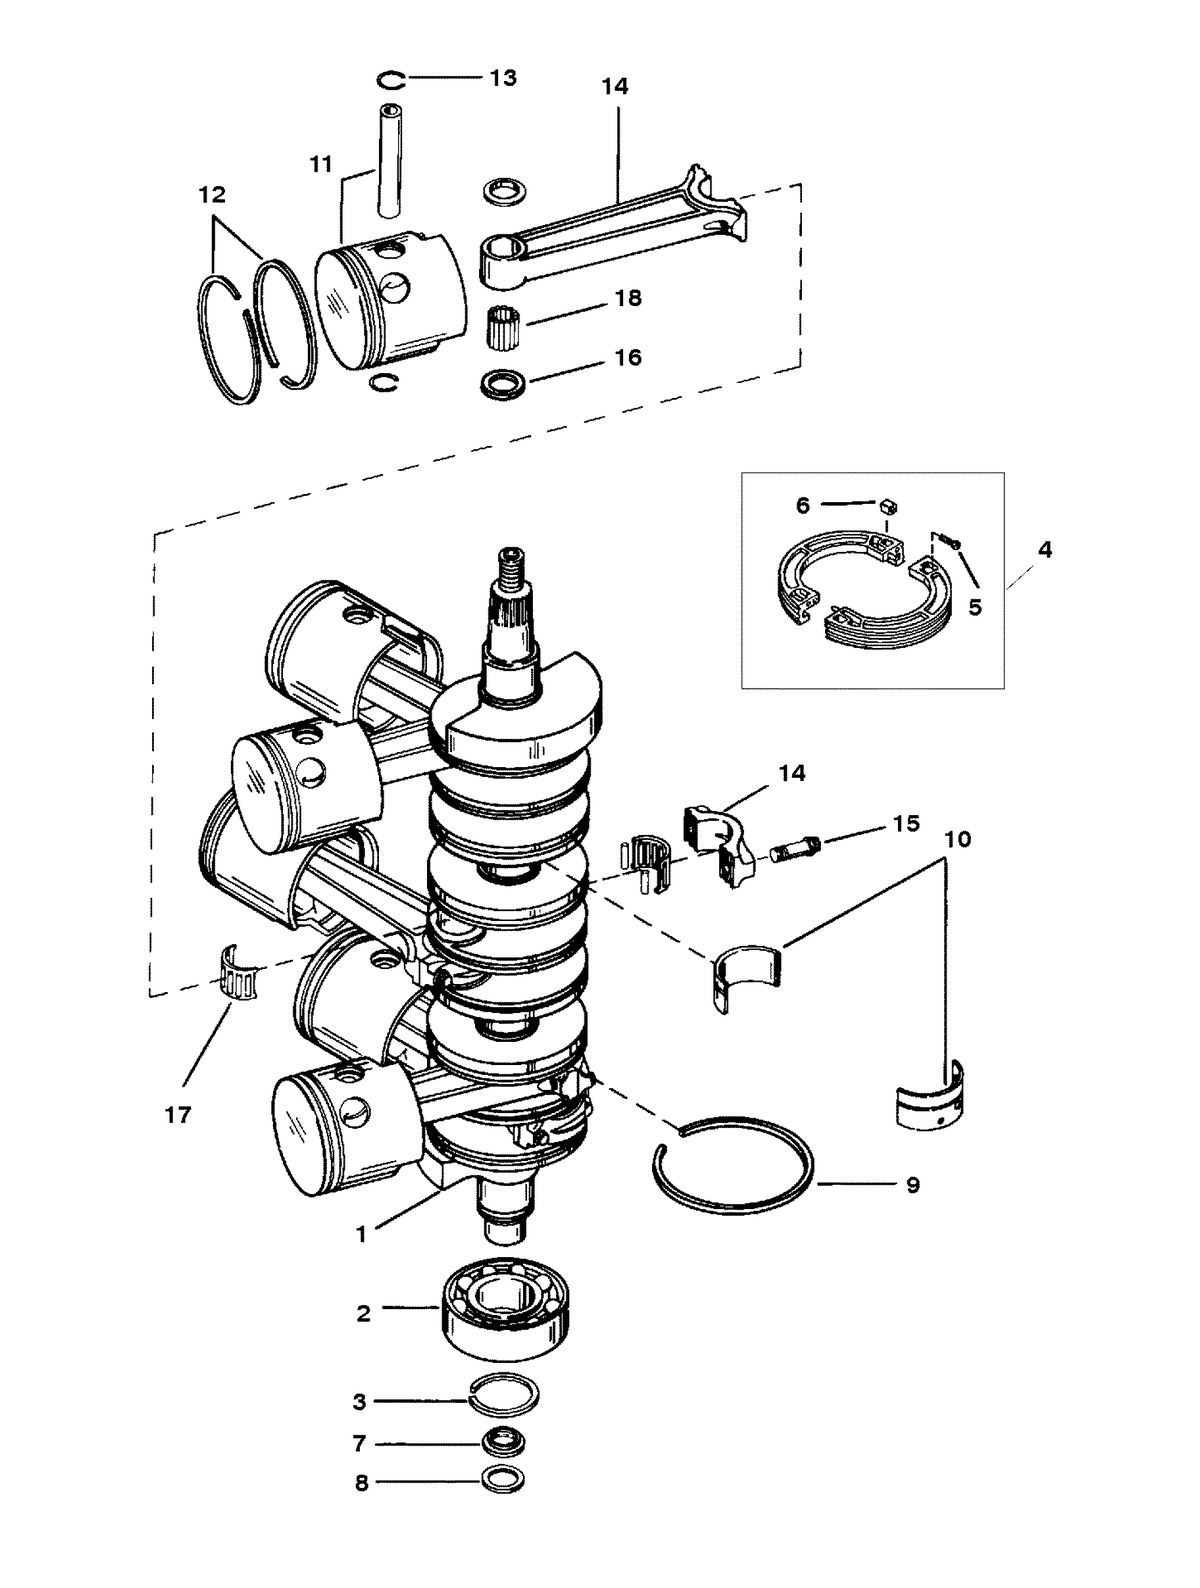 RACE OUTBOARD 225 (EFI) PRO-MAX/SUPER MAGNUM CRANKSHAFT, PISTONS AND CONNECTING RODS